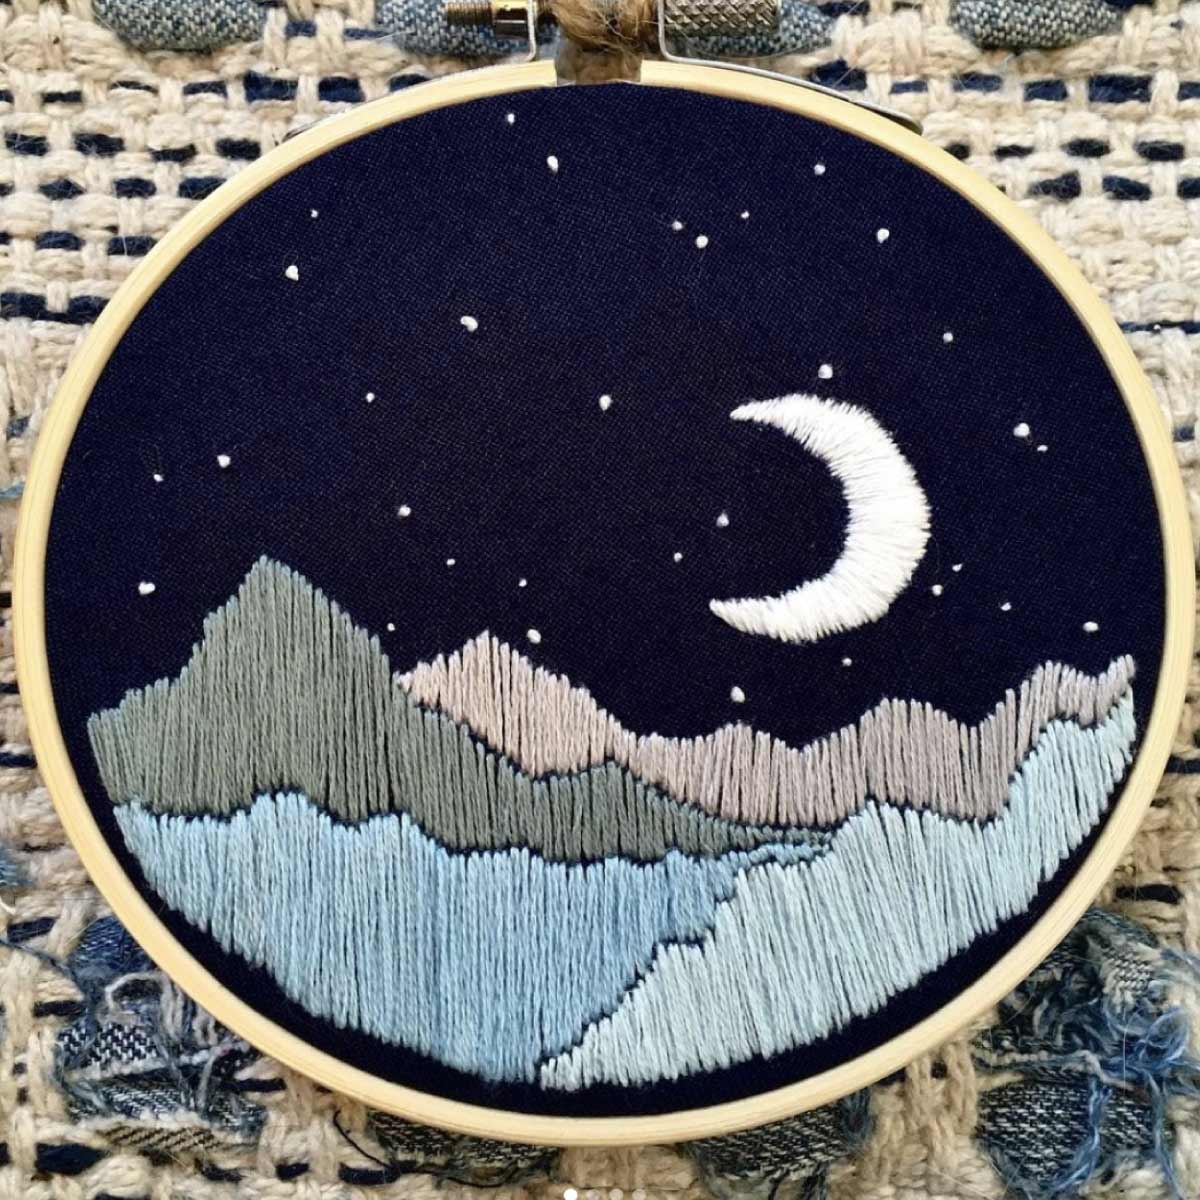 Moon Embroidery Patterns